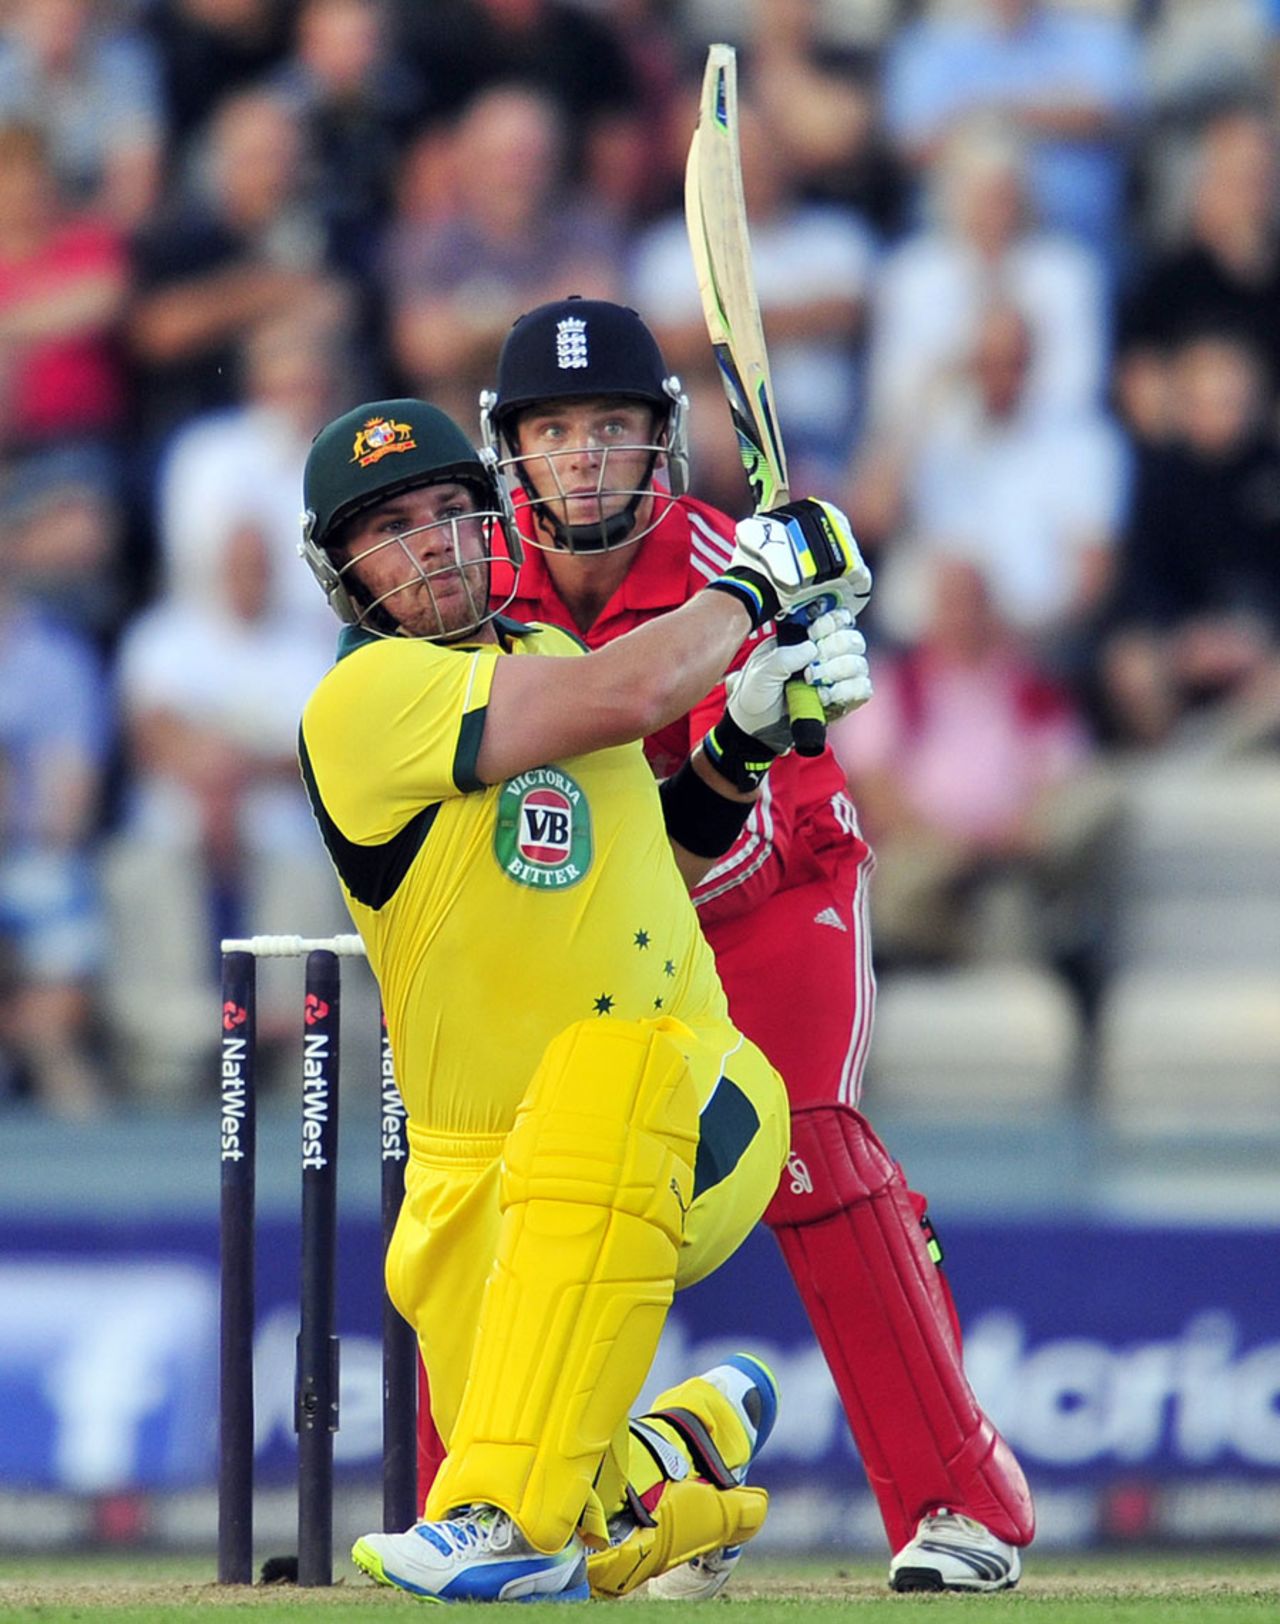 Aaron Finch smashed his first T20 international hundred, England v Australia, 1st T20, Ageas Bowl, August 29, 2013